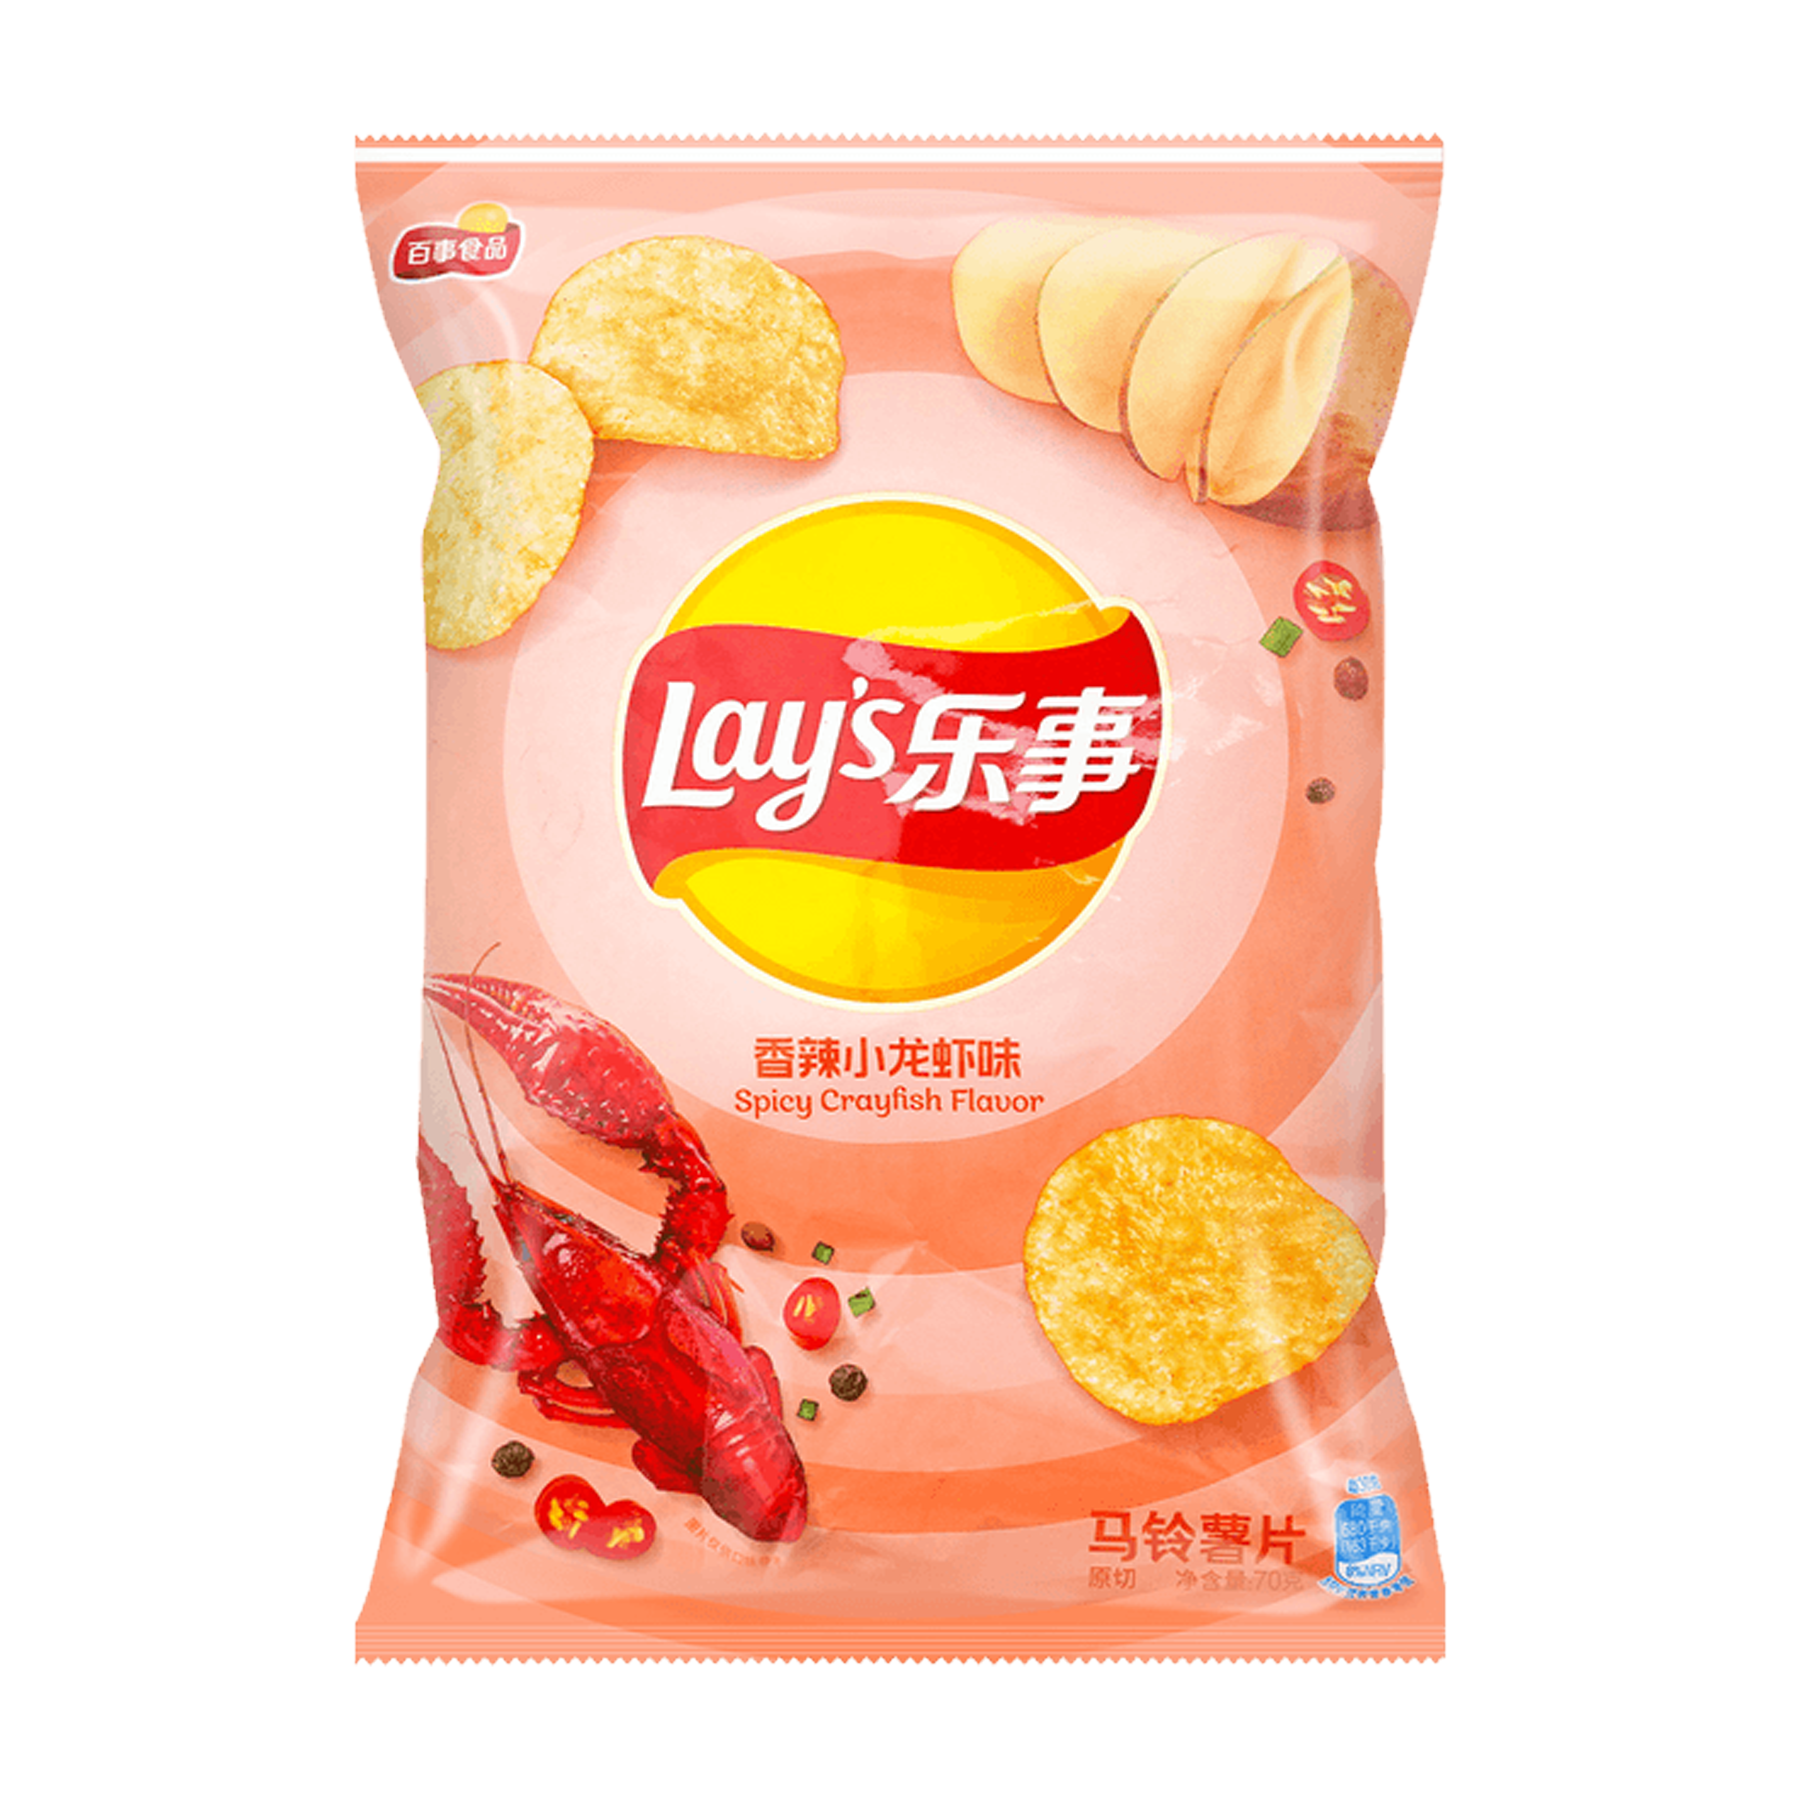 Lays Spicy Crayfish Flavored Chips